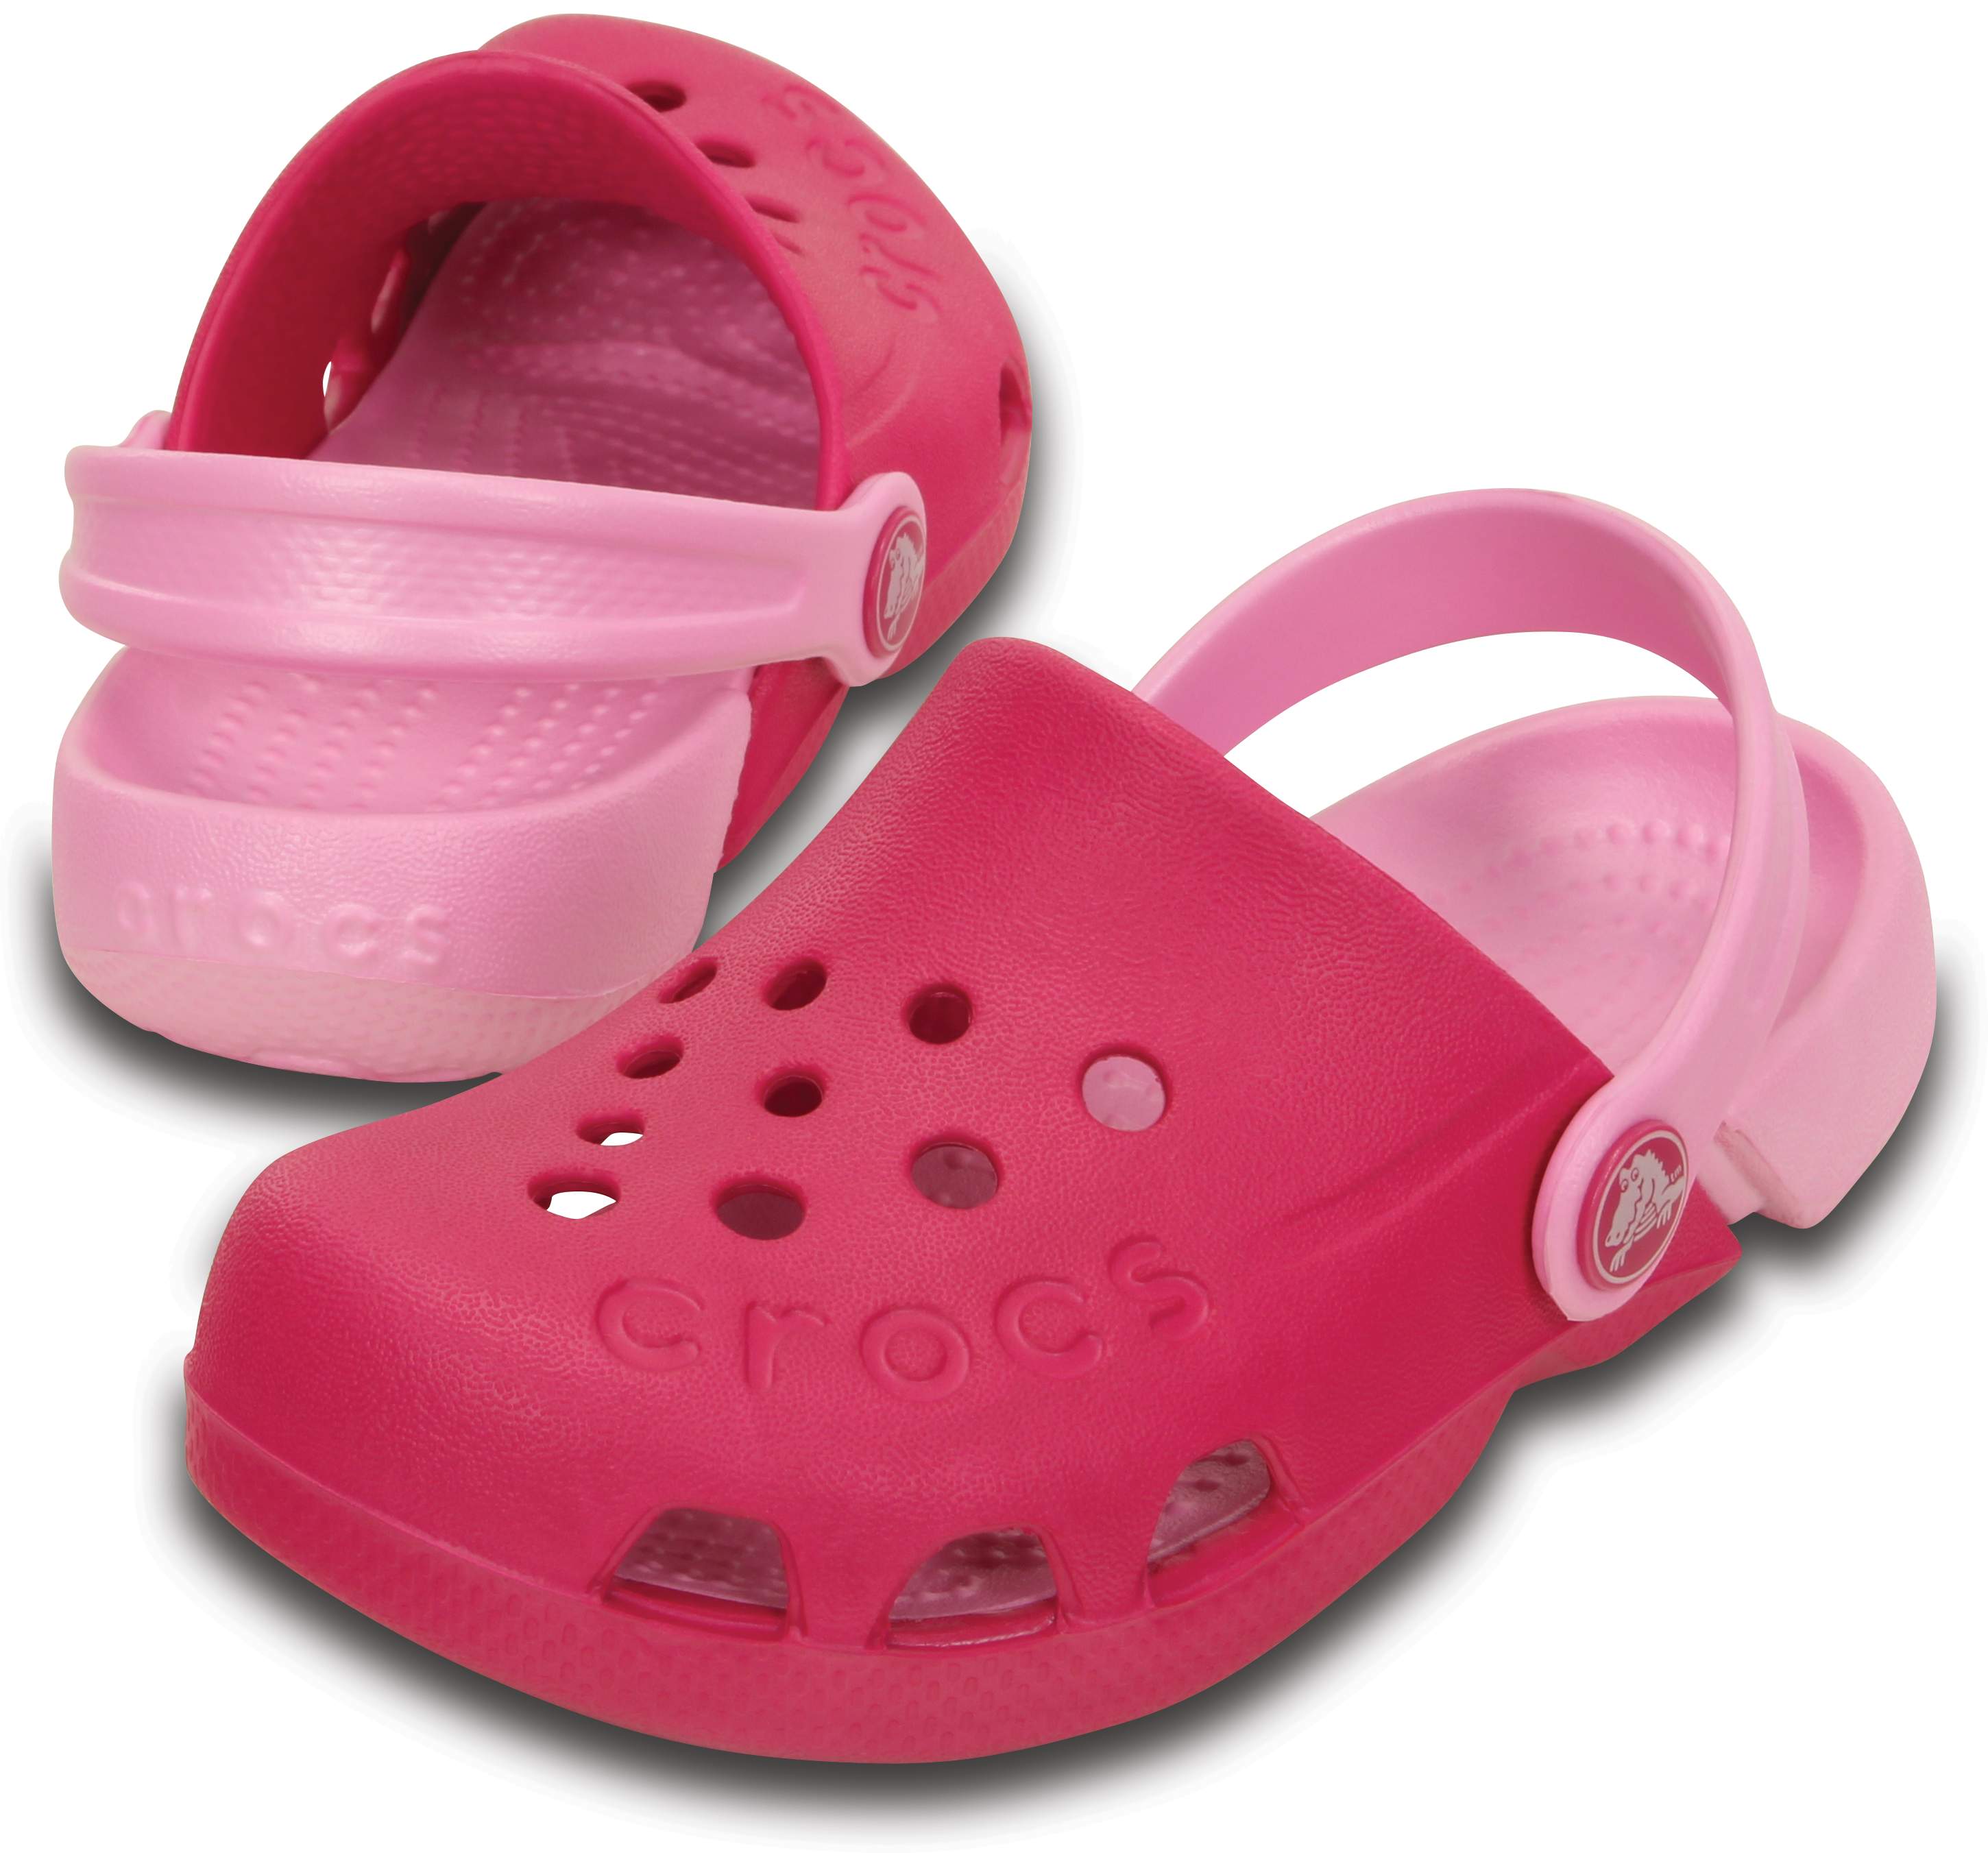 where to buy toddler crocs